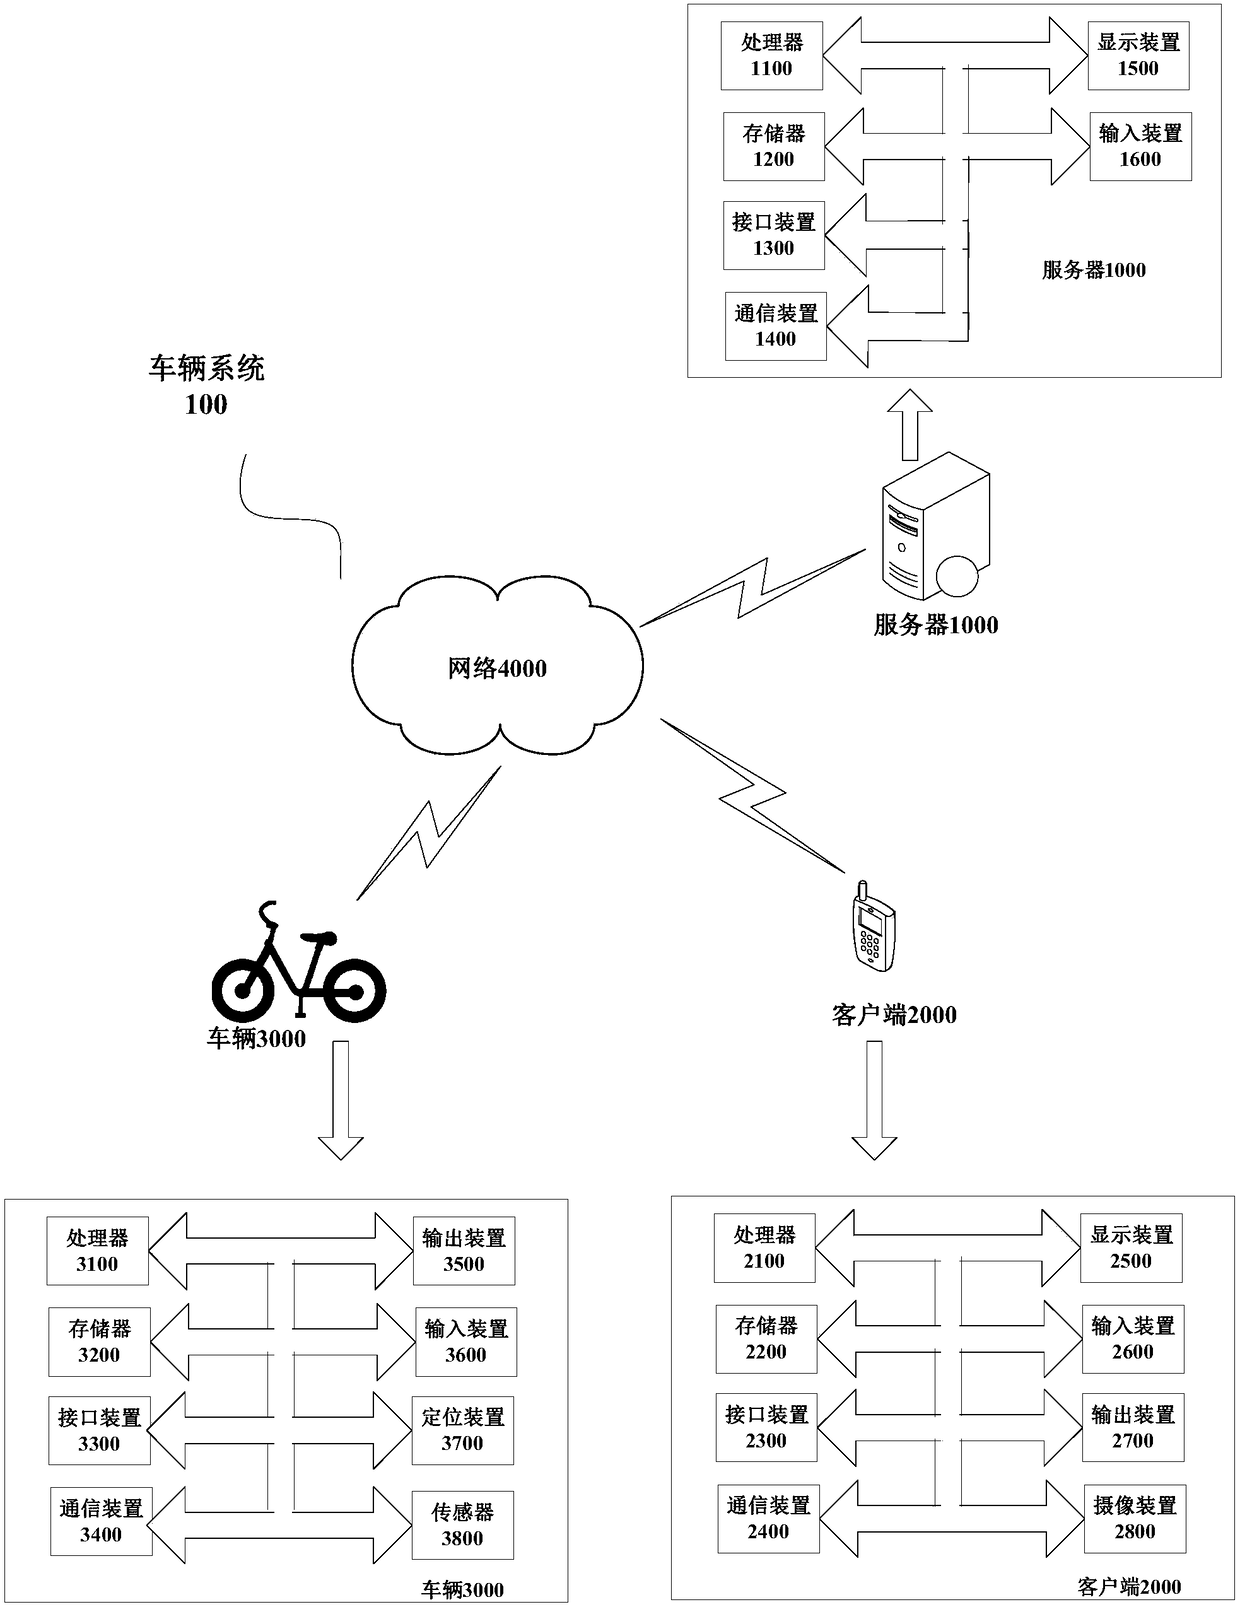 Vehicle scheduling method and system, server and client